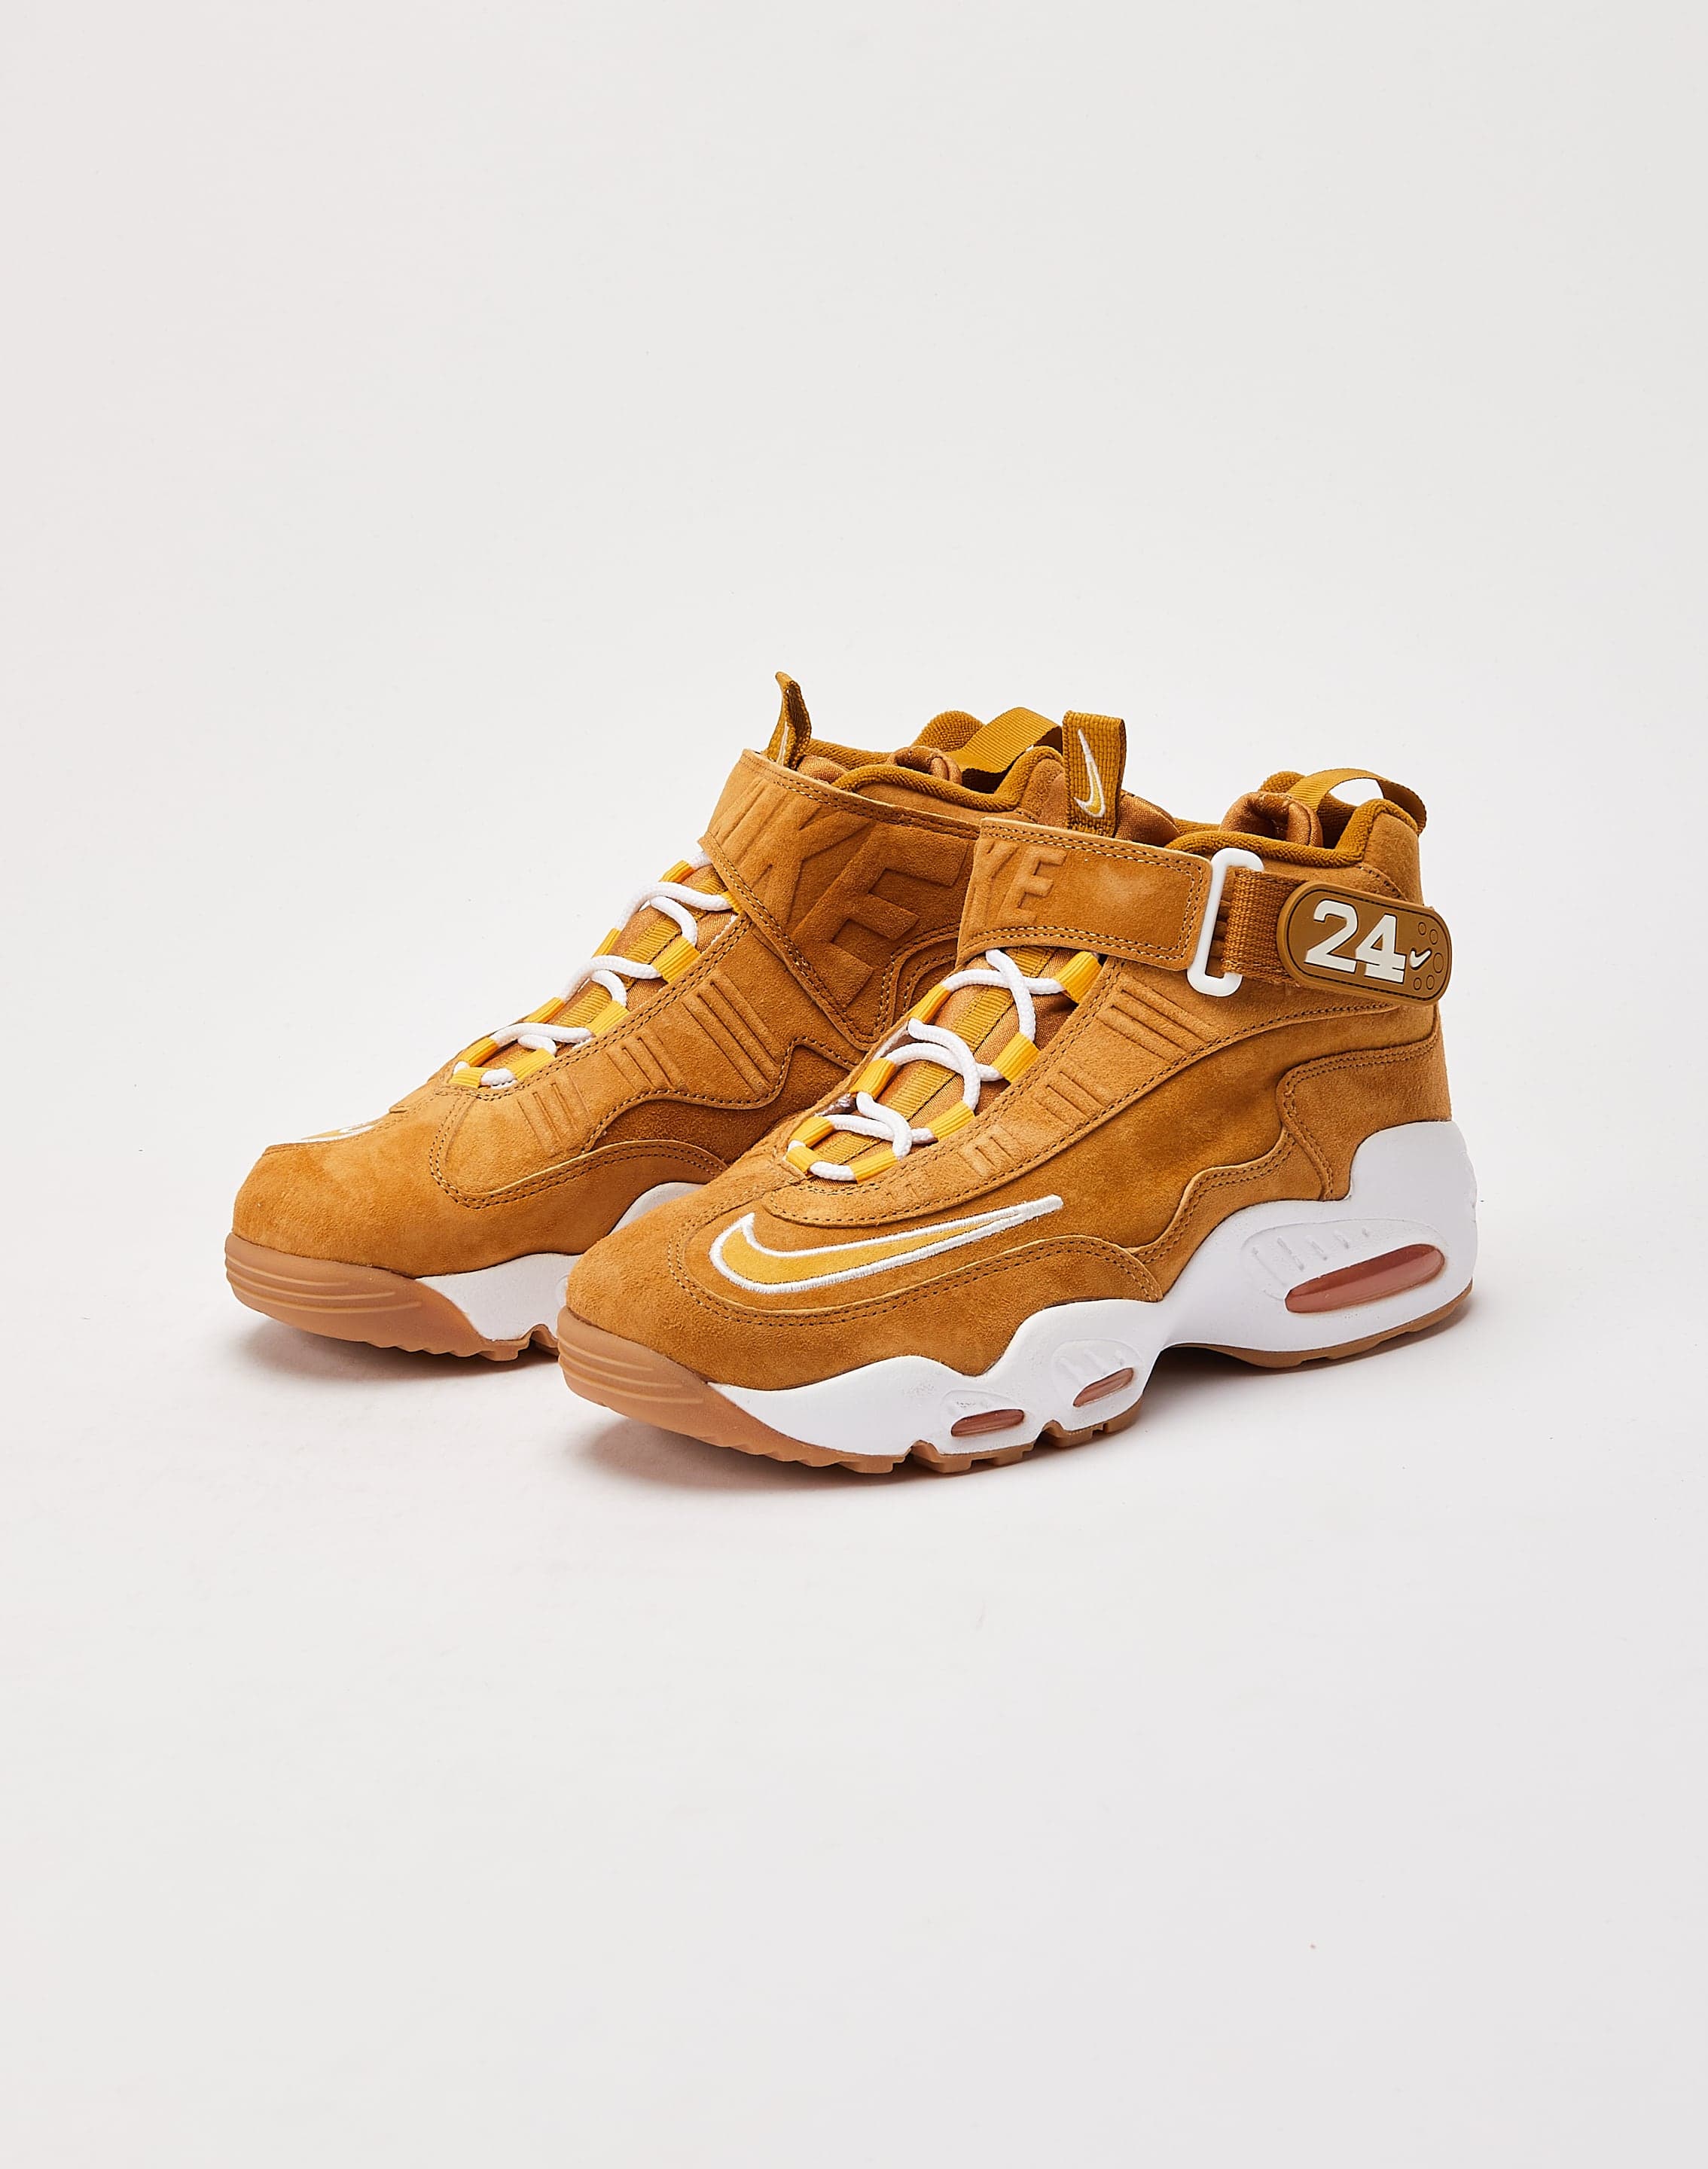 Nike Air Griffey Max 360 “Yacht/Chosen One” - Available 